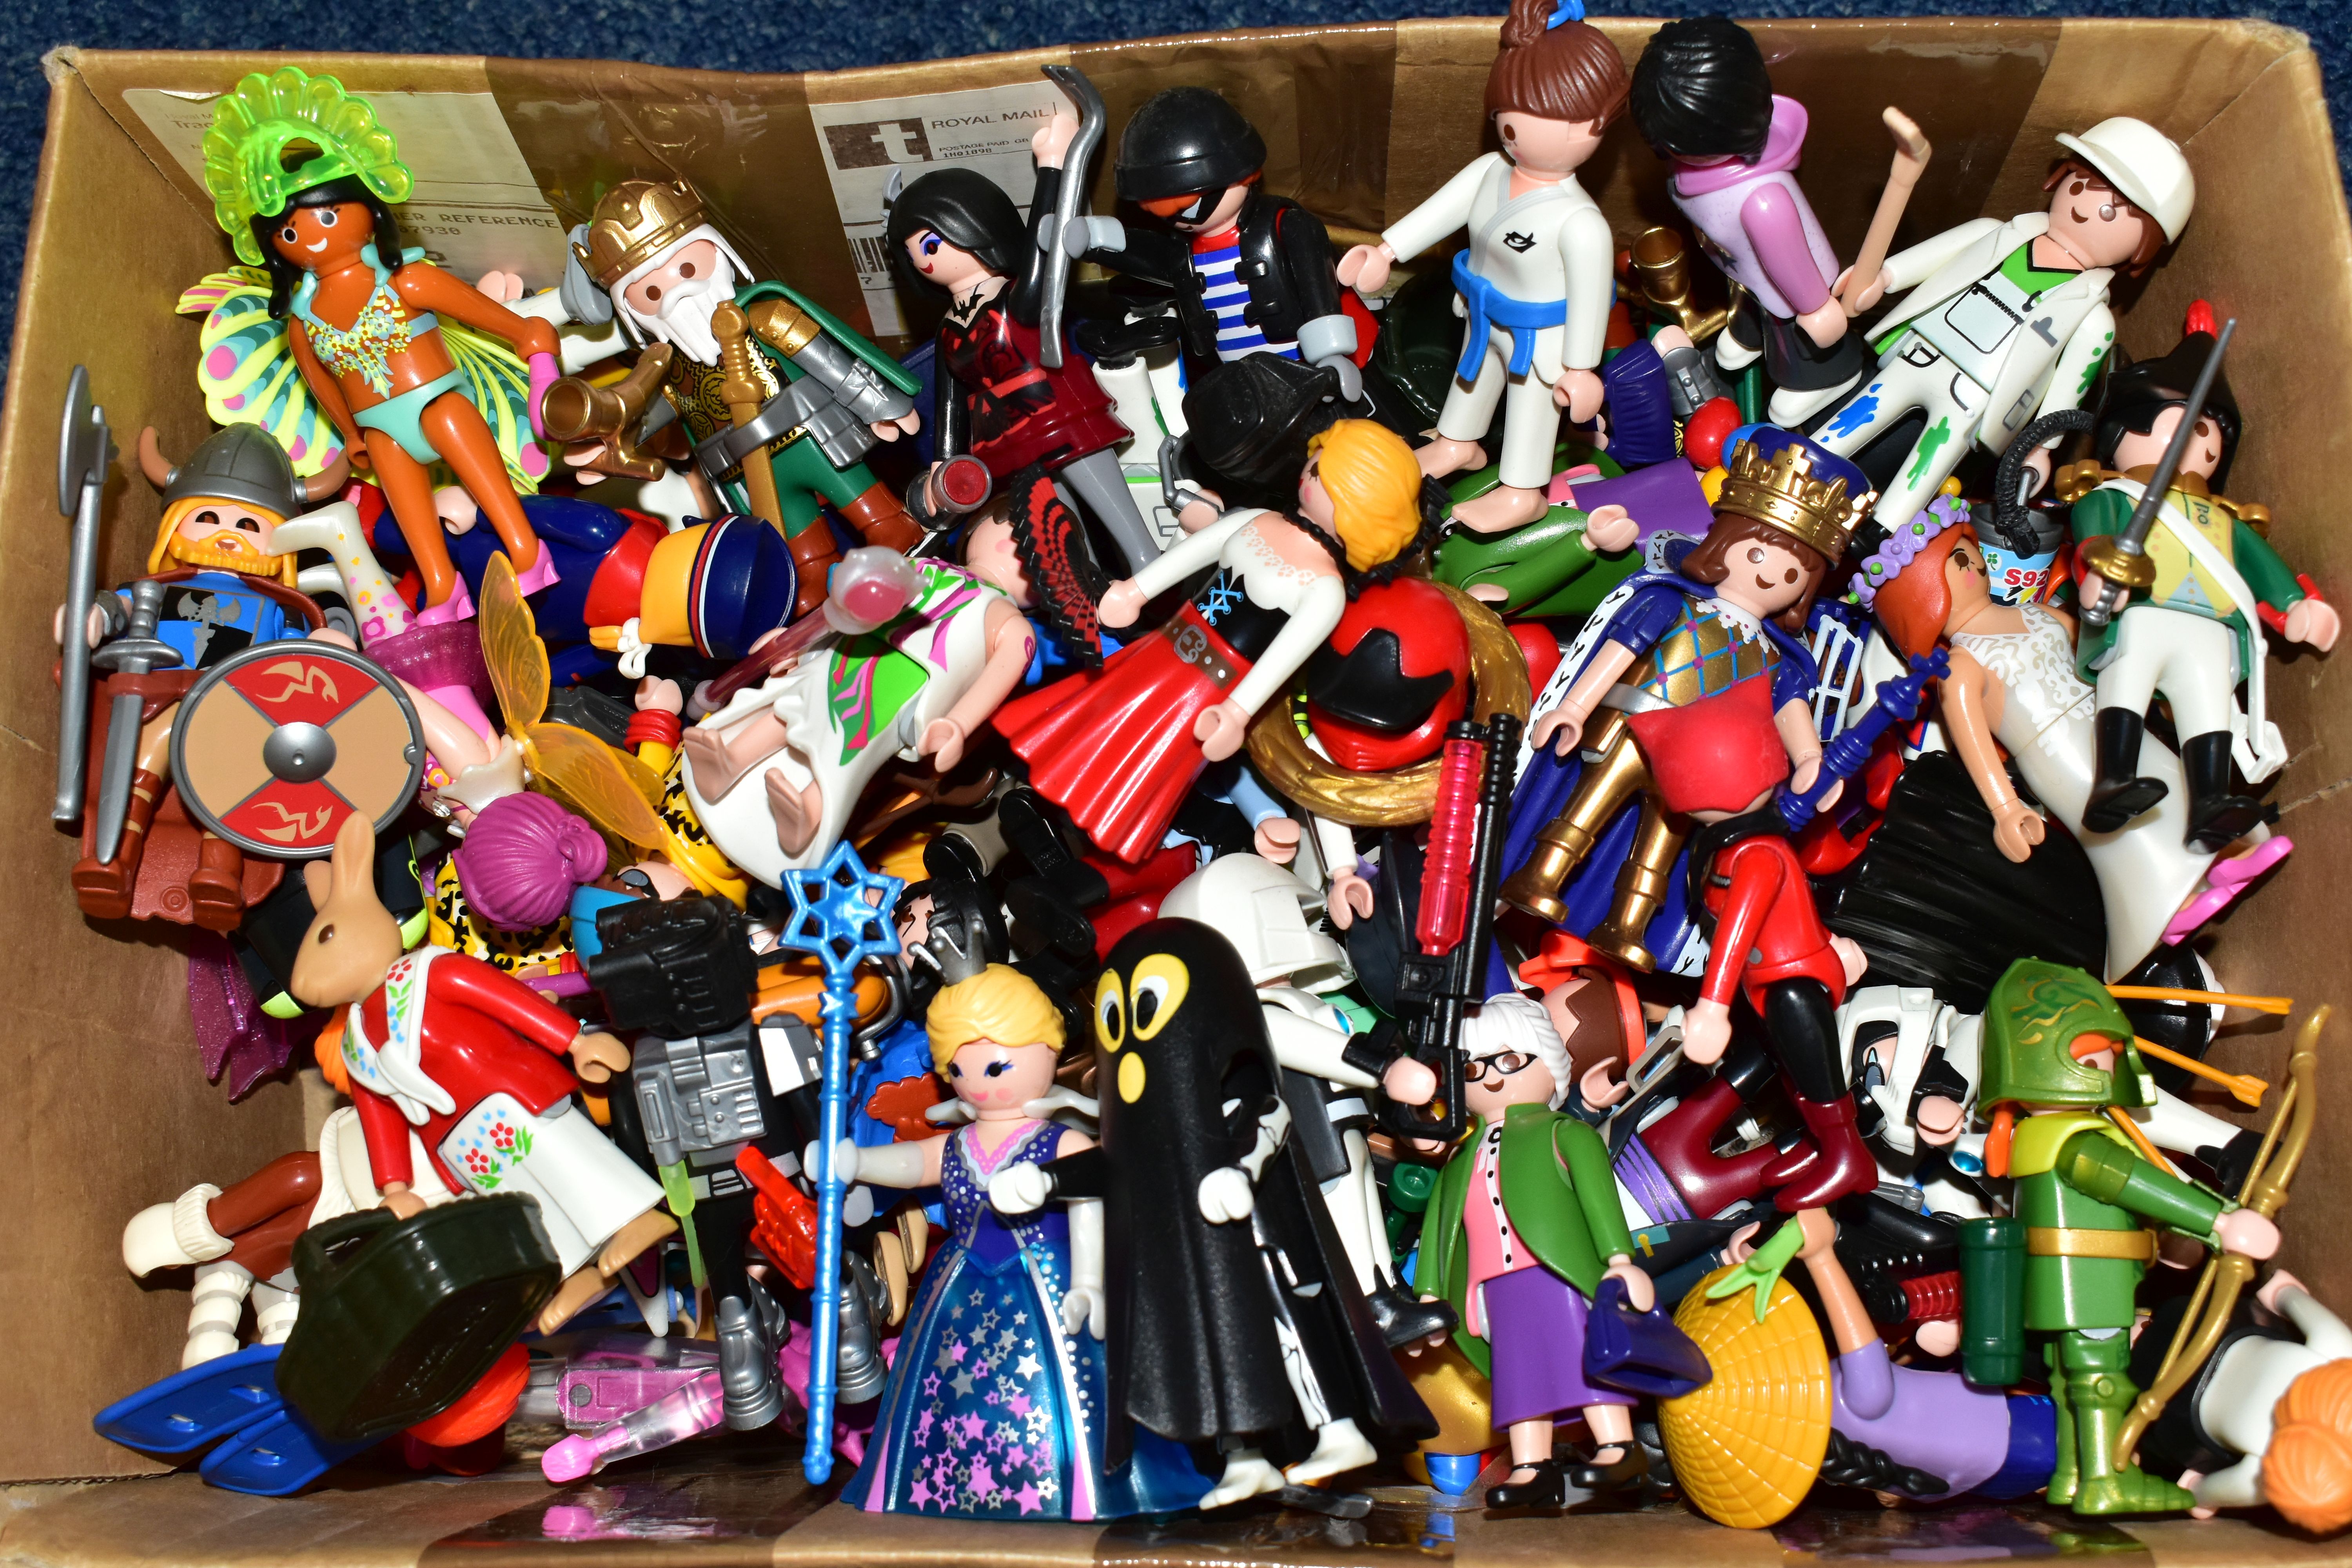 A QUANTITY OF ASSORTED LOOSE PLAYMOBIL FIGURES, from assorted series, many with weapons and